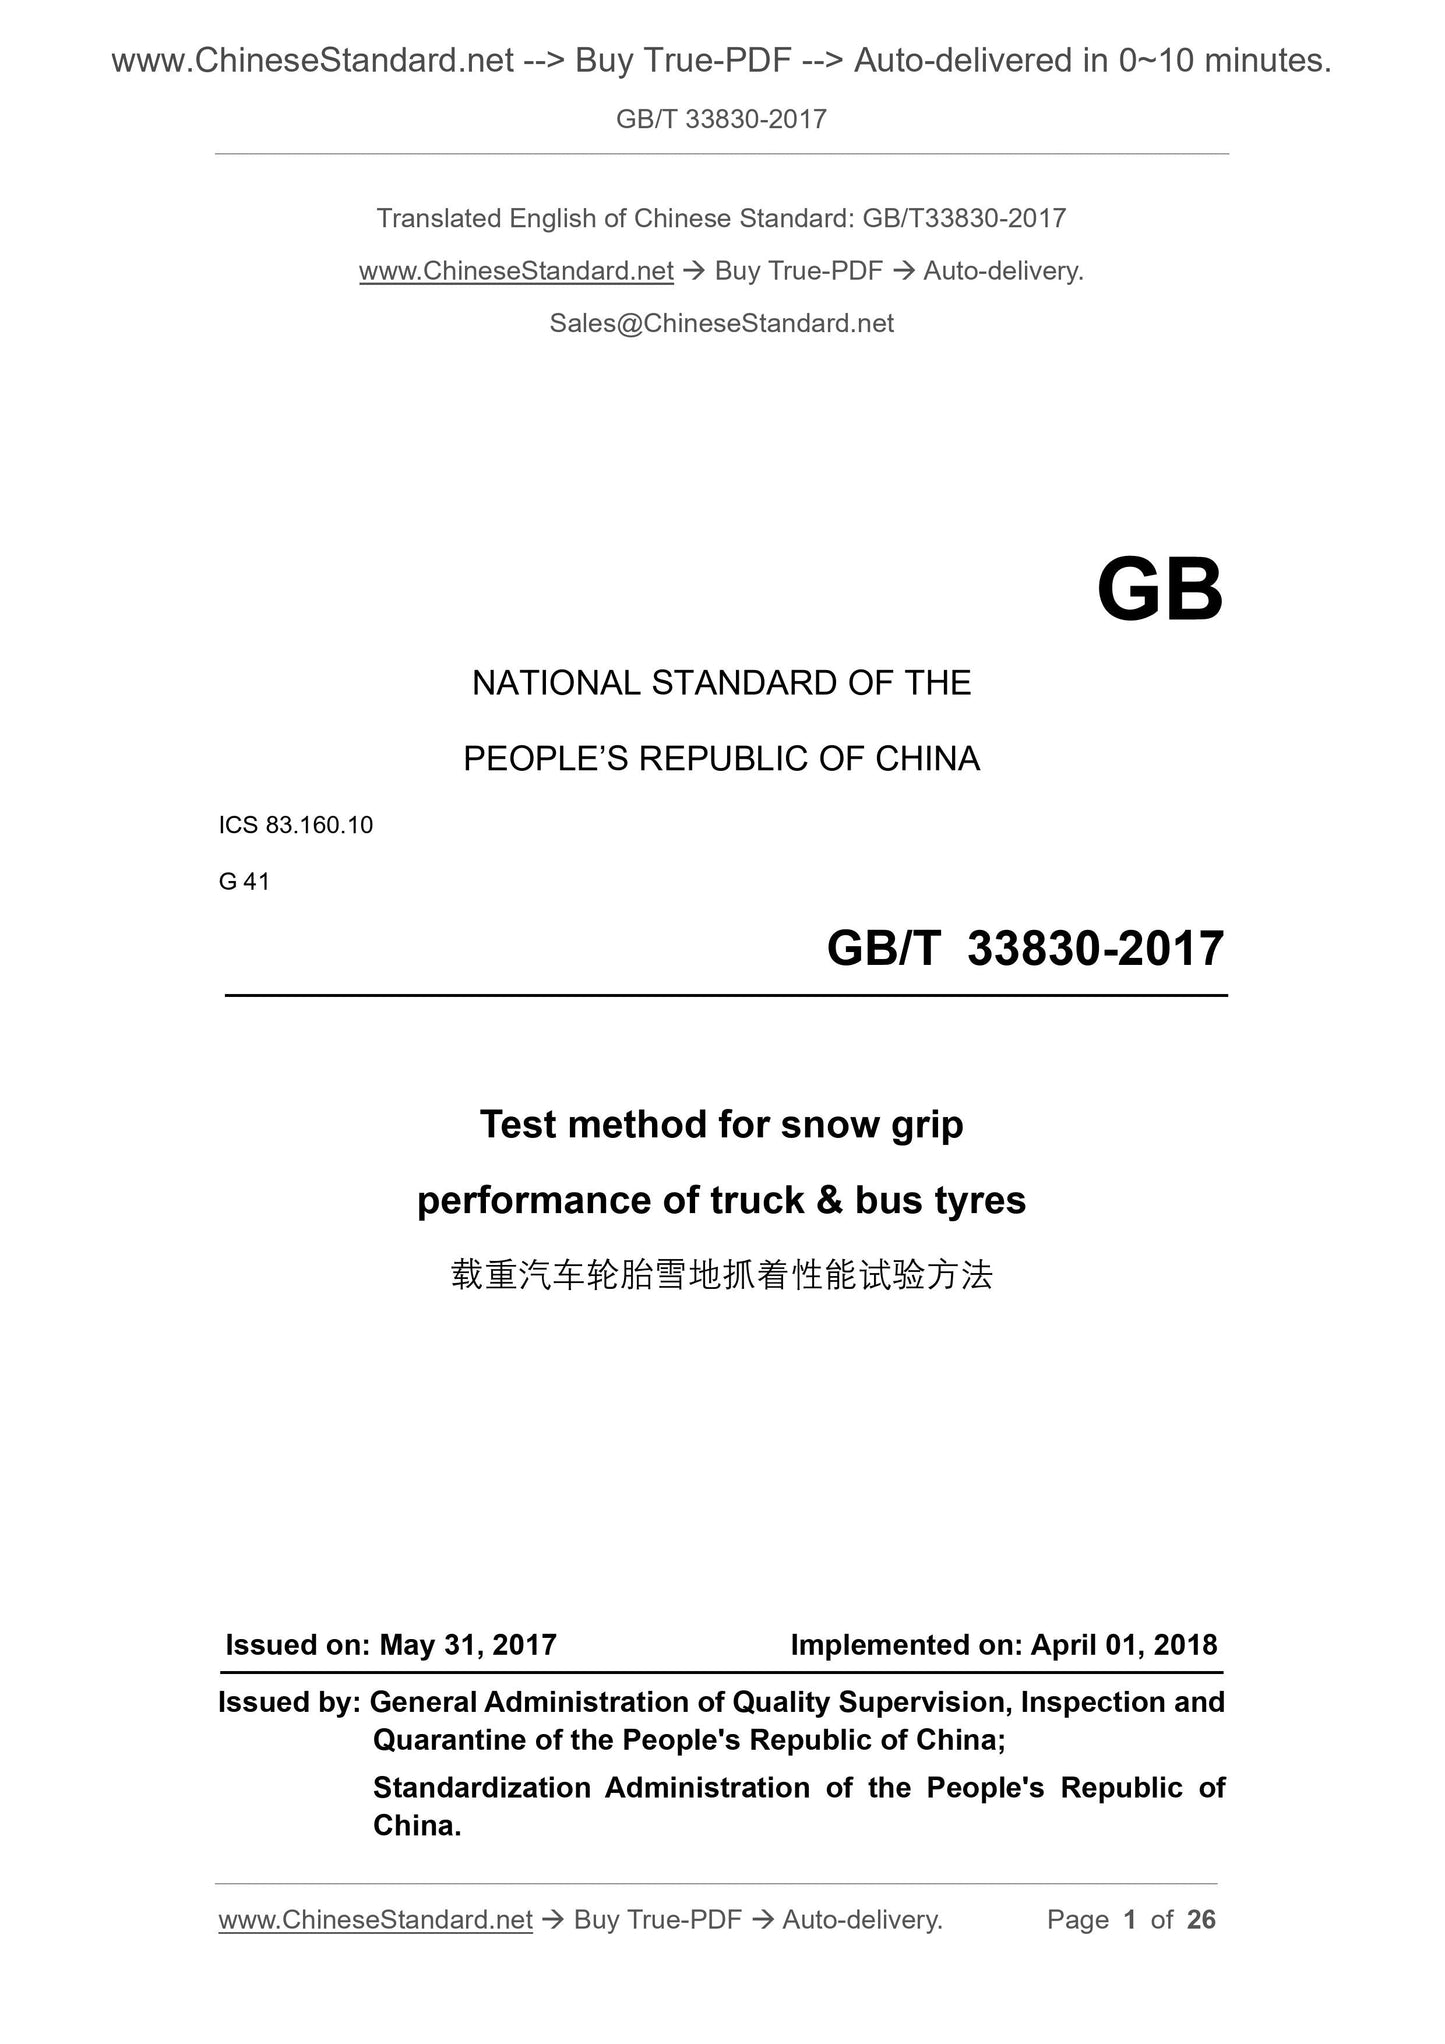 GB/T 33830-2017 Page 1